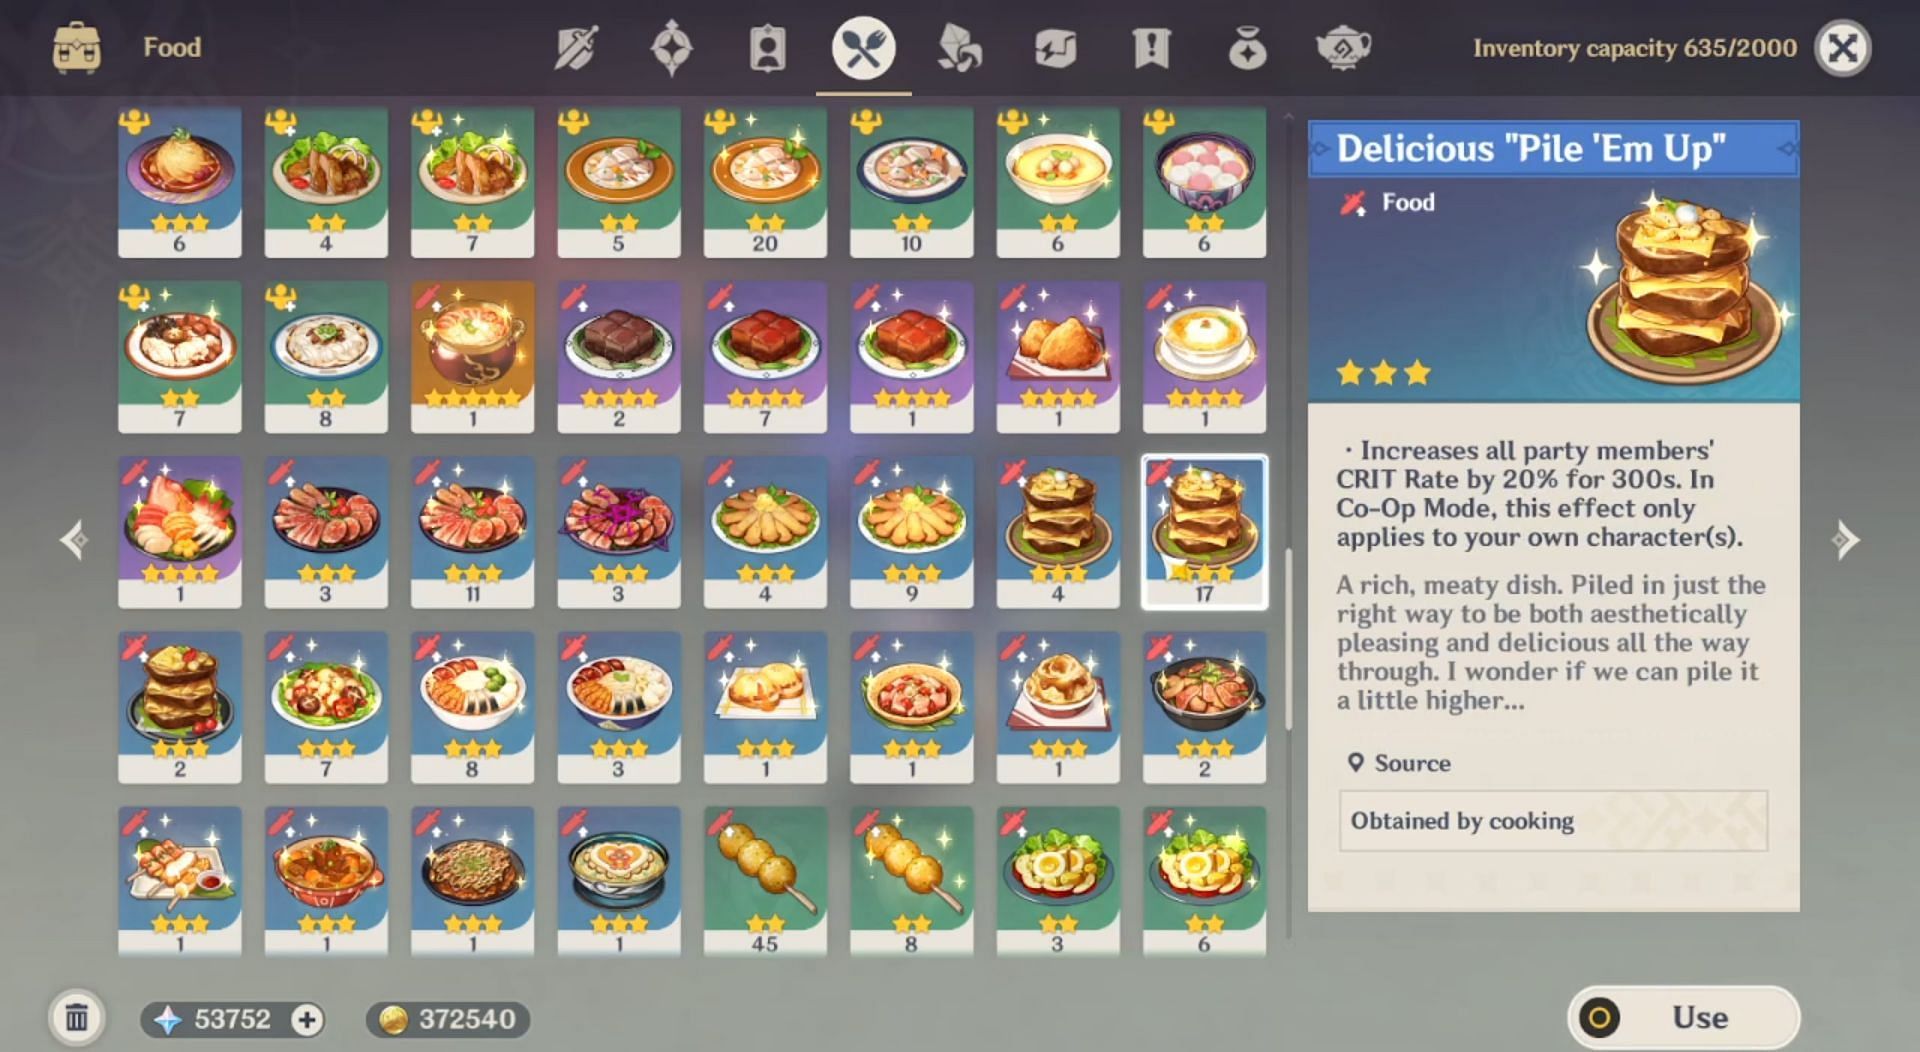 Consume food that increases Crit Rate and attacks (Image via HoYoverse)